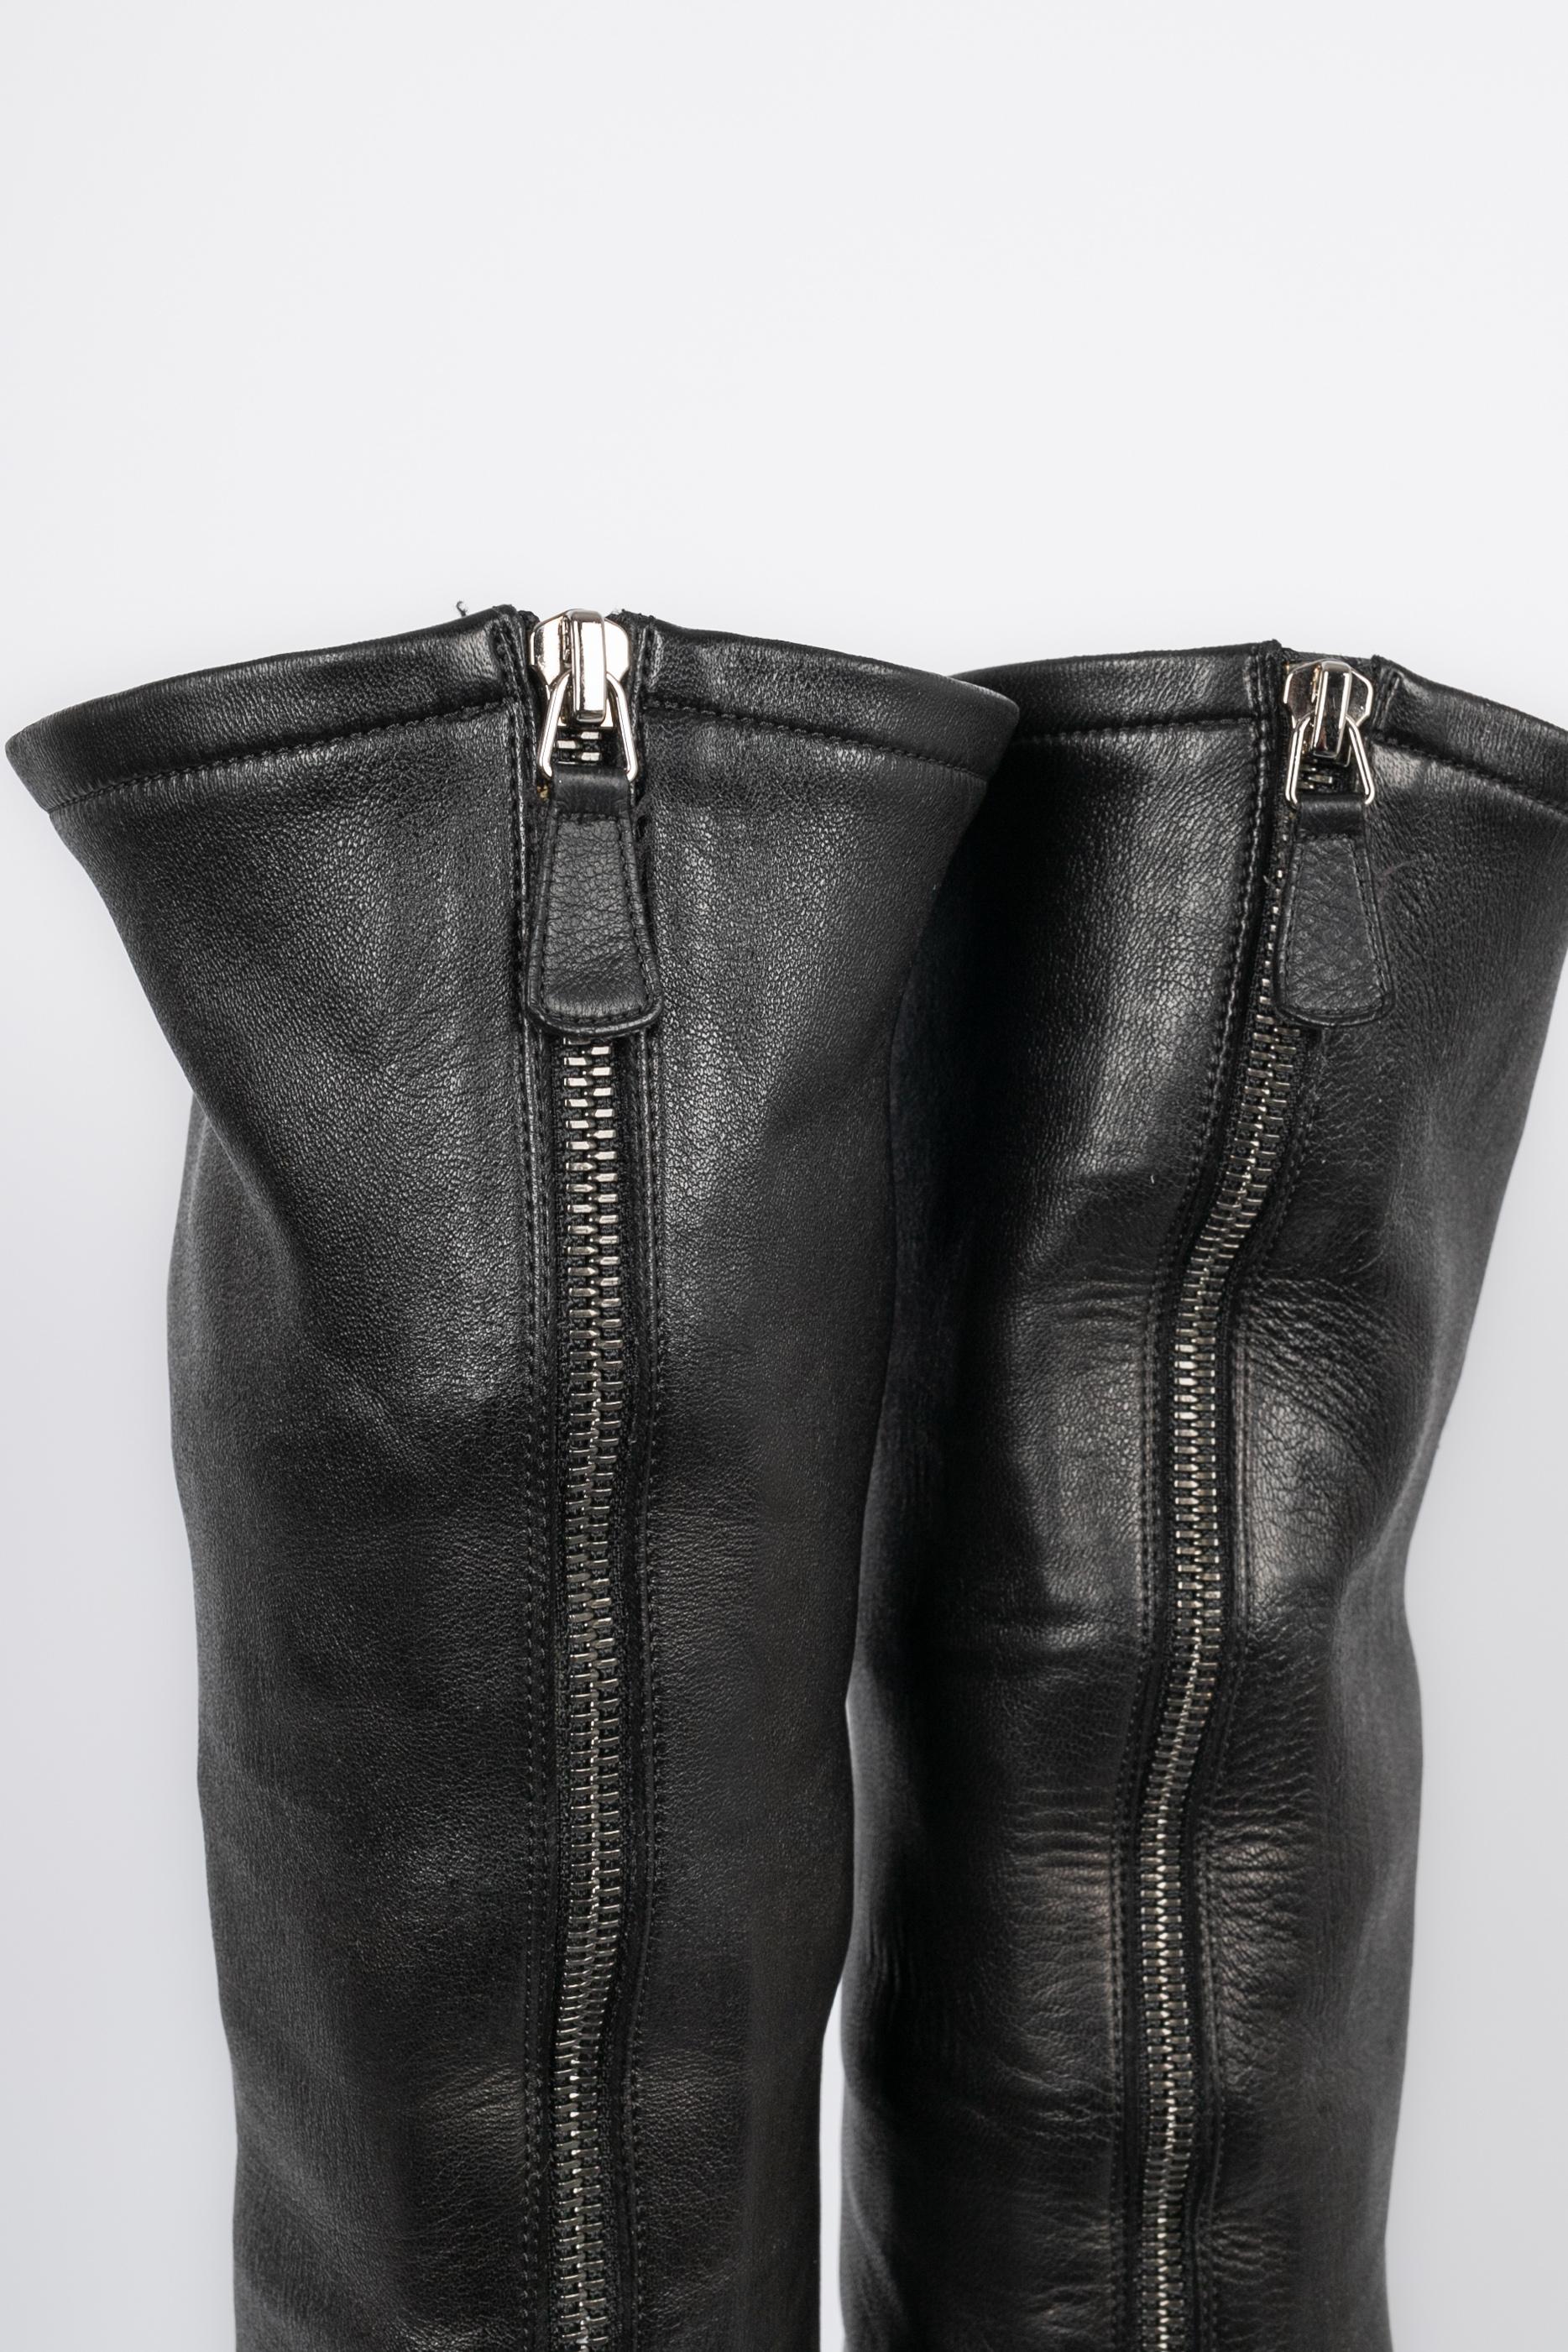 Chanel leather thigh high boots For Sale 3